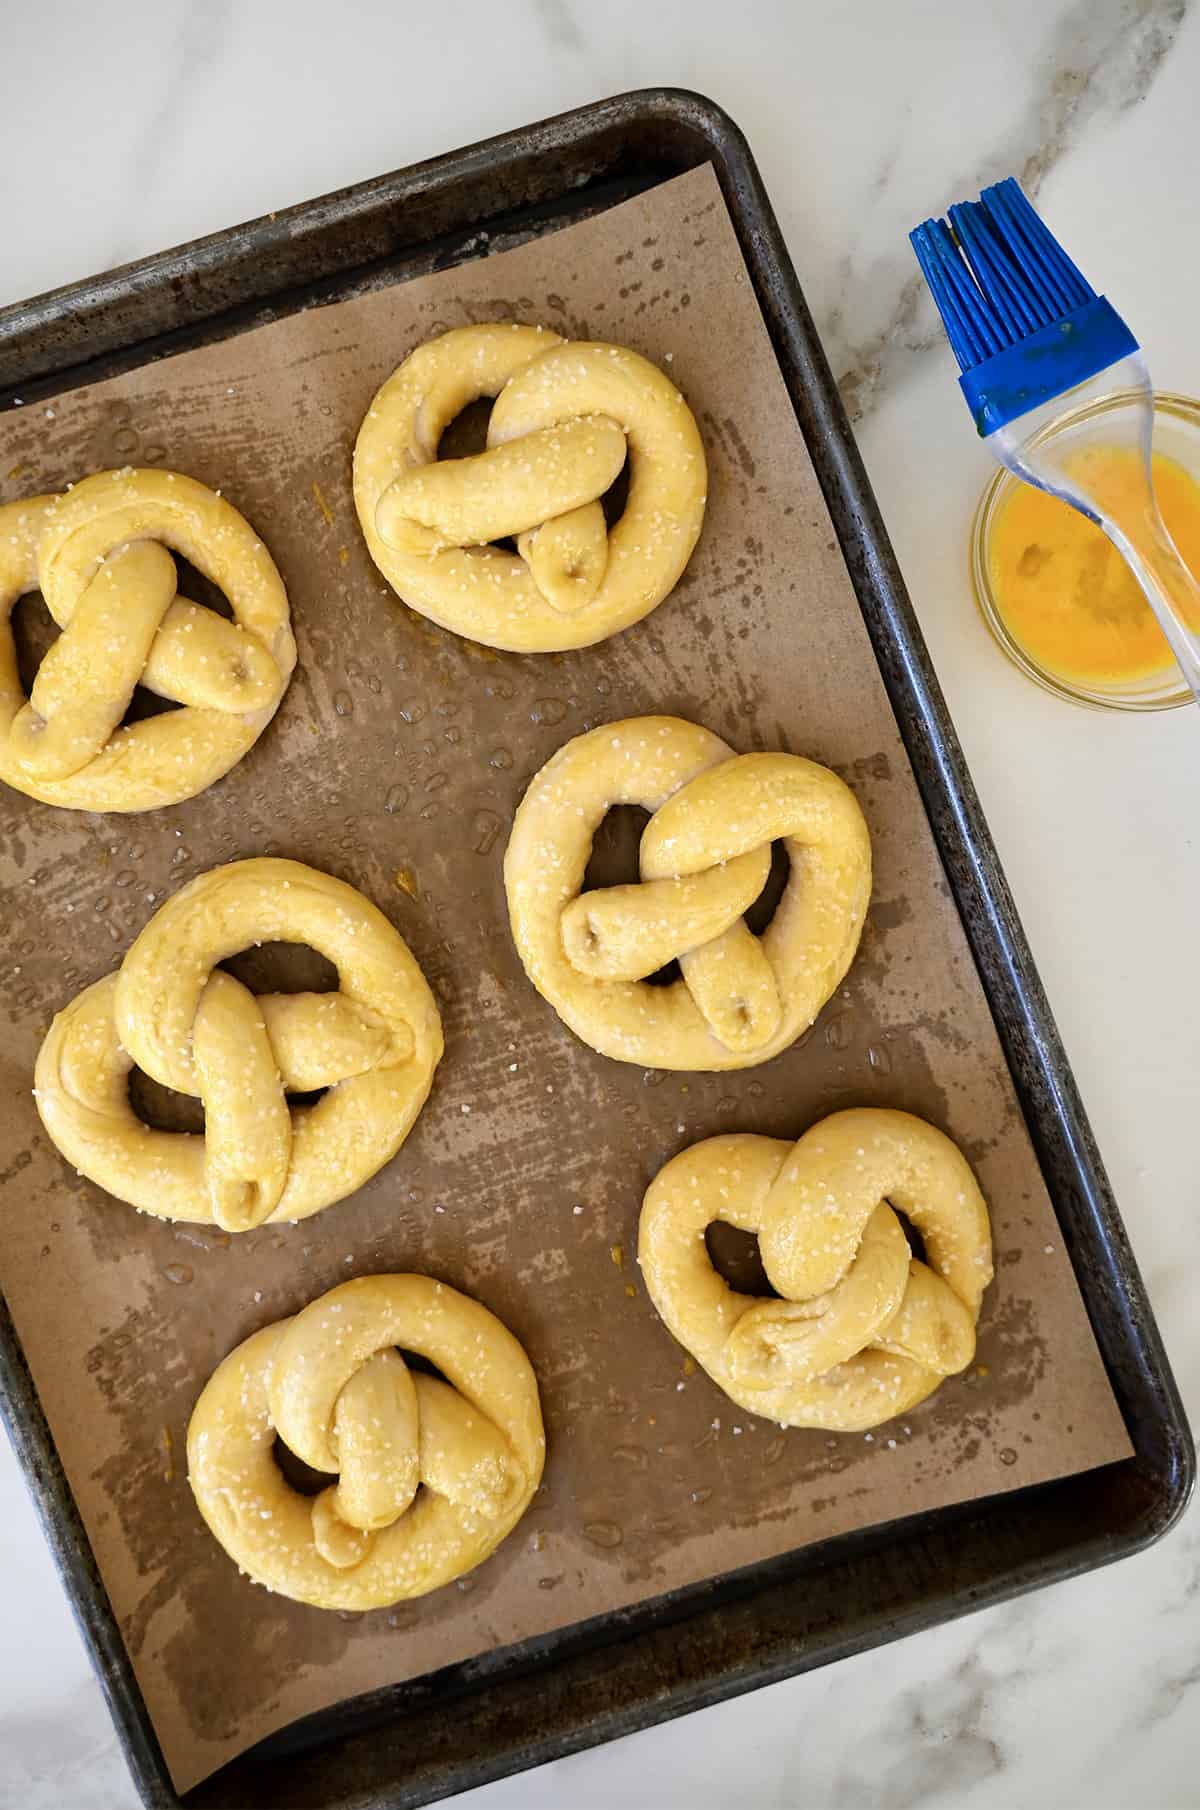 Six unbaked pretzels on a baking sheet topped with an egg wash and sprinkled with salt. A small bowl containing egg wash and a pastry brush are next it.